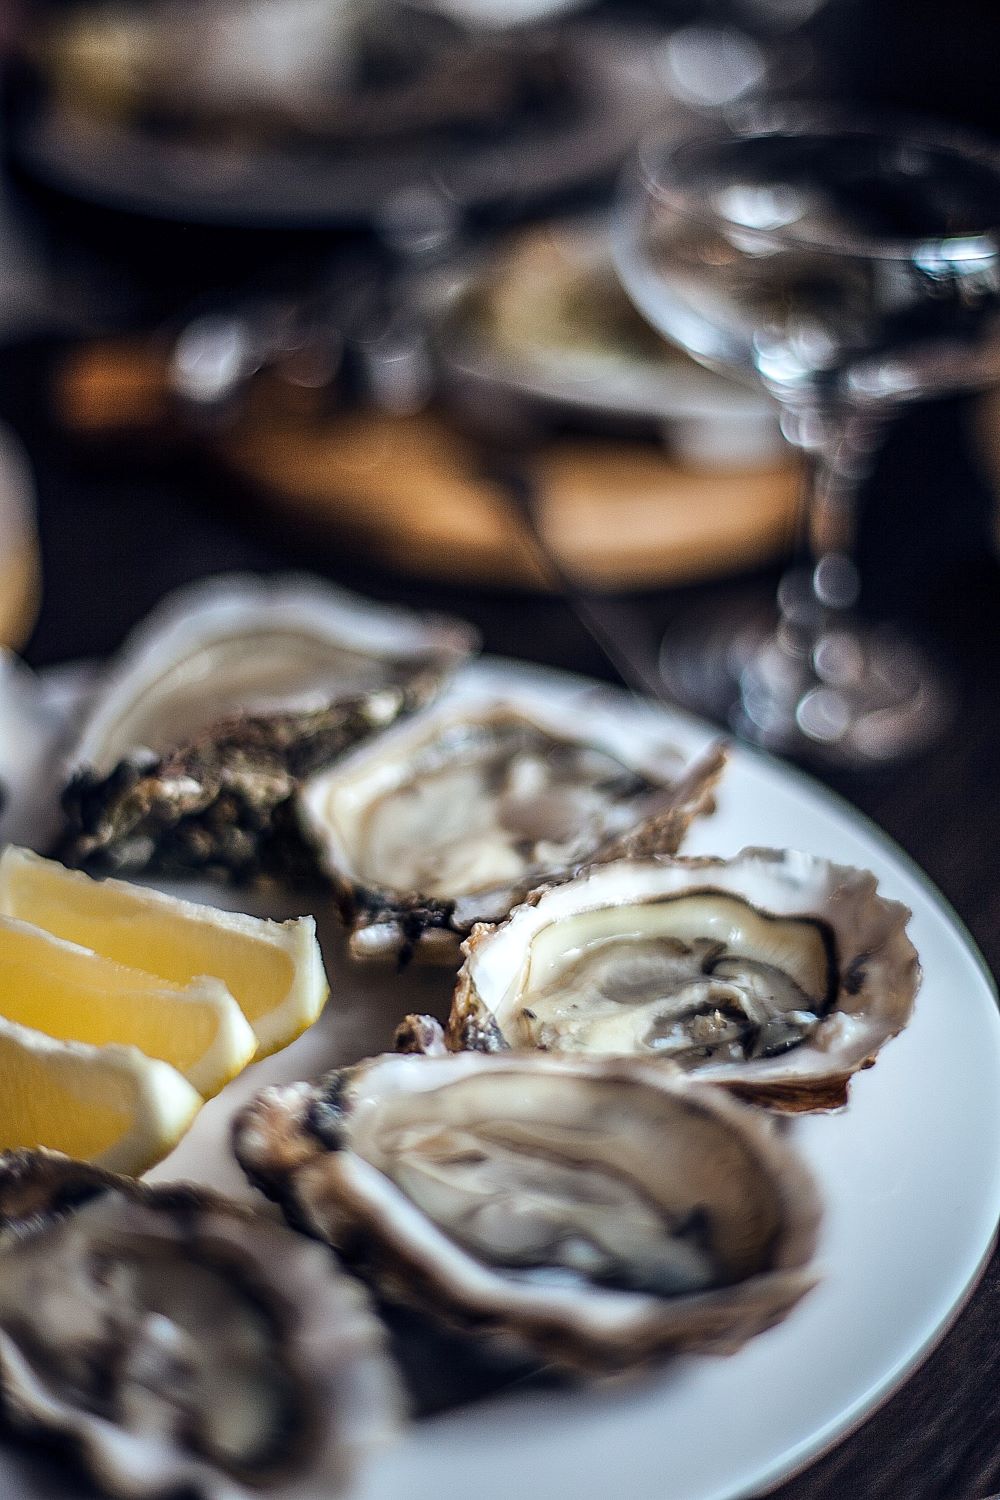 France Bans Oysters to Protect Public Health Against Norovirus